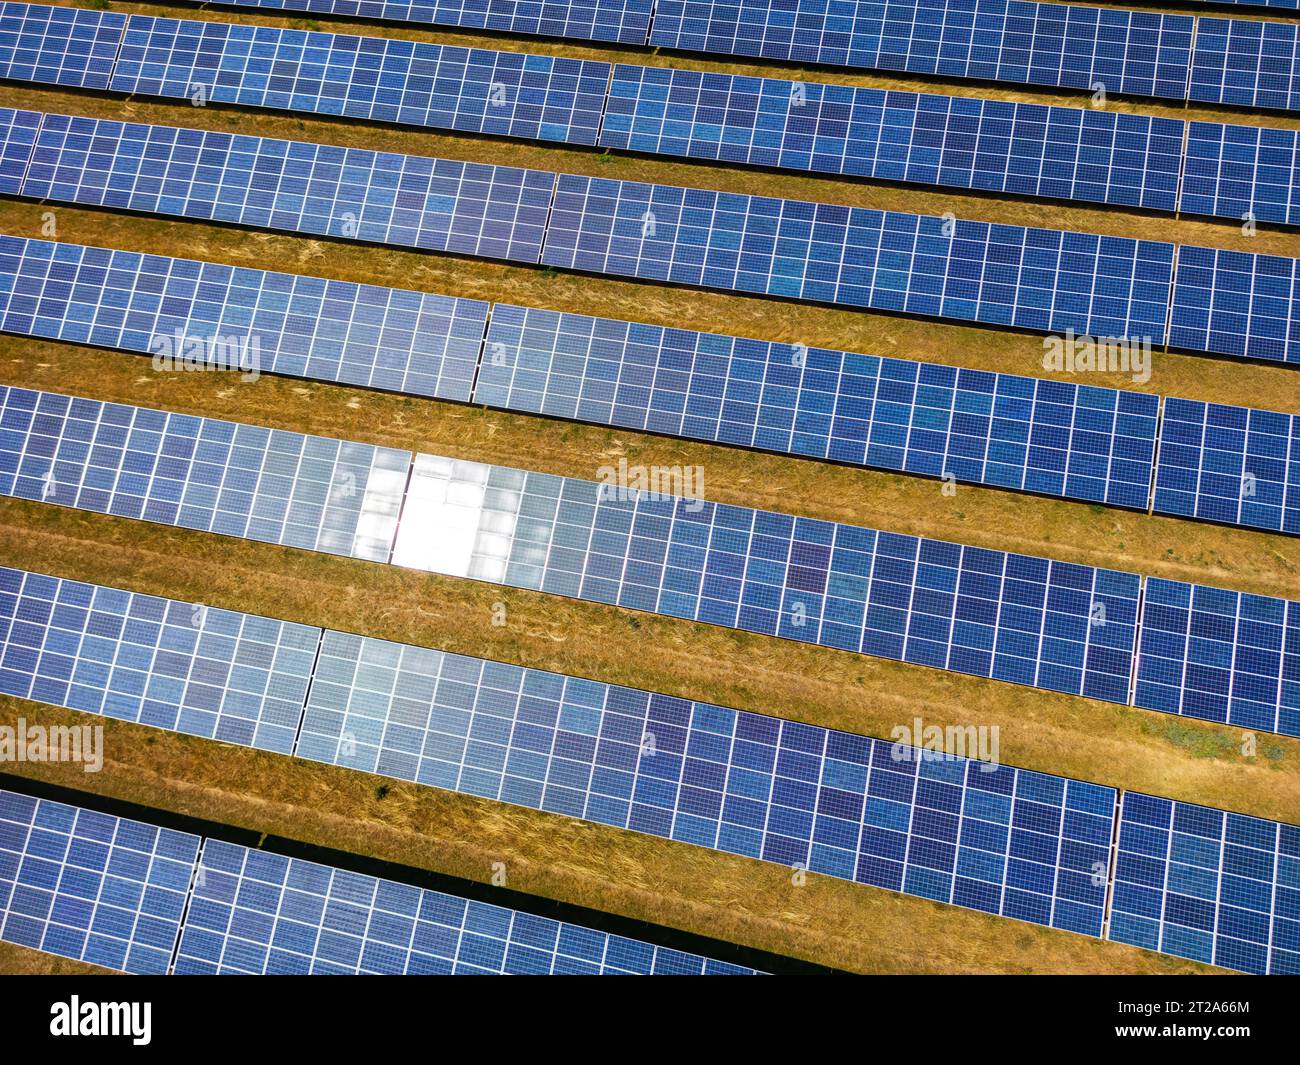 Close up of a solar power plant generating solar electricity over many rows of solar panels on a sunny day, Germany Stock Photo